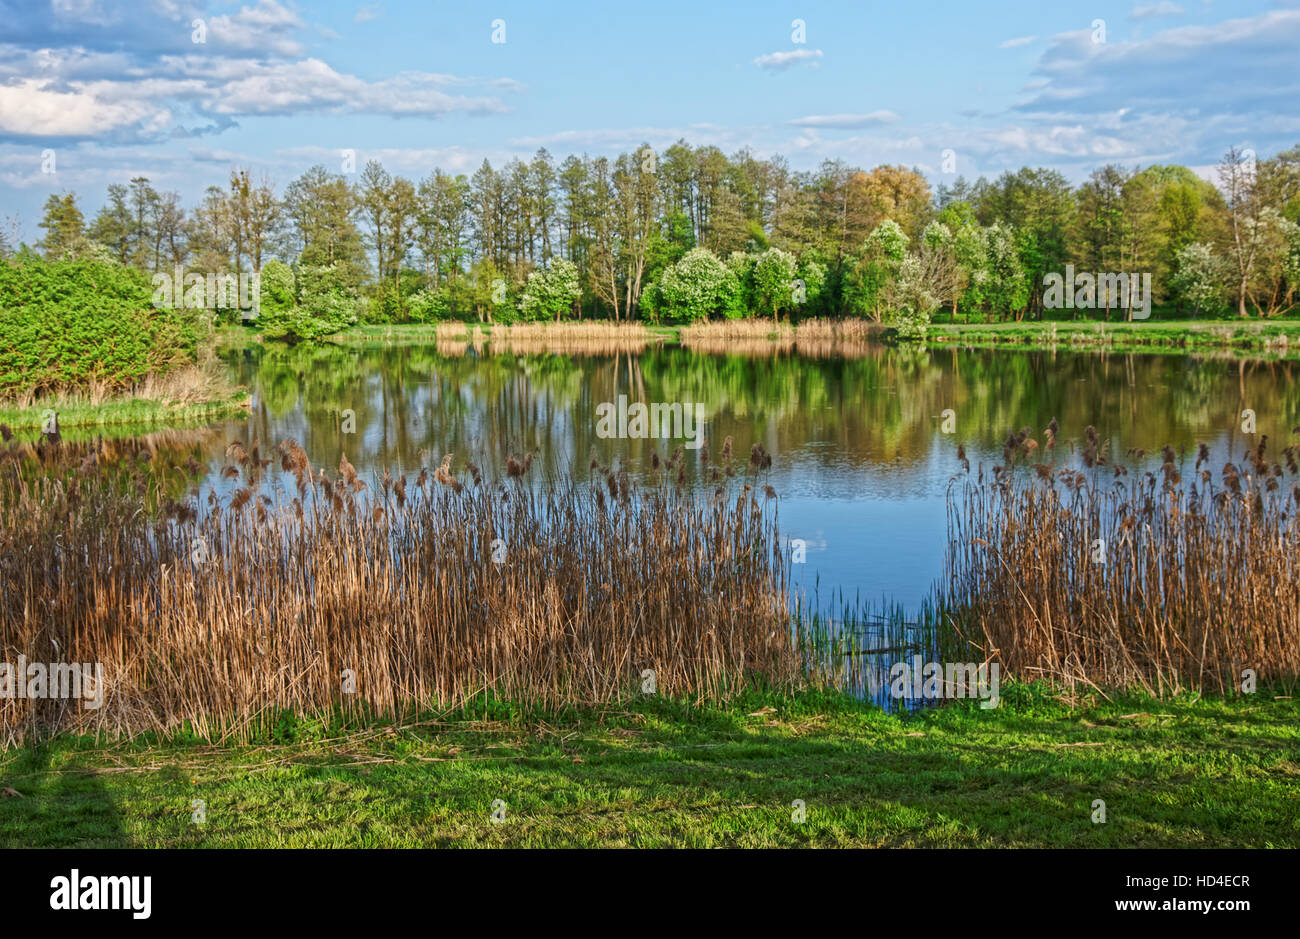 Trees reflected in a pond at Bialowieza National Park as a part of Belovezhskaya Pushcha National Park in Poland. Stock Photo